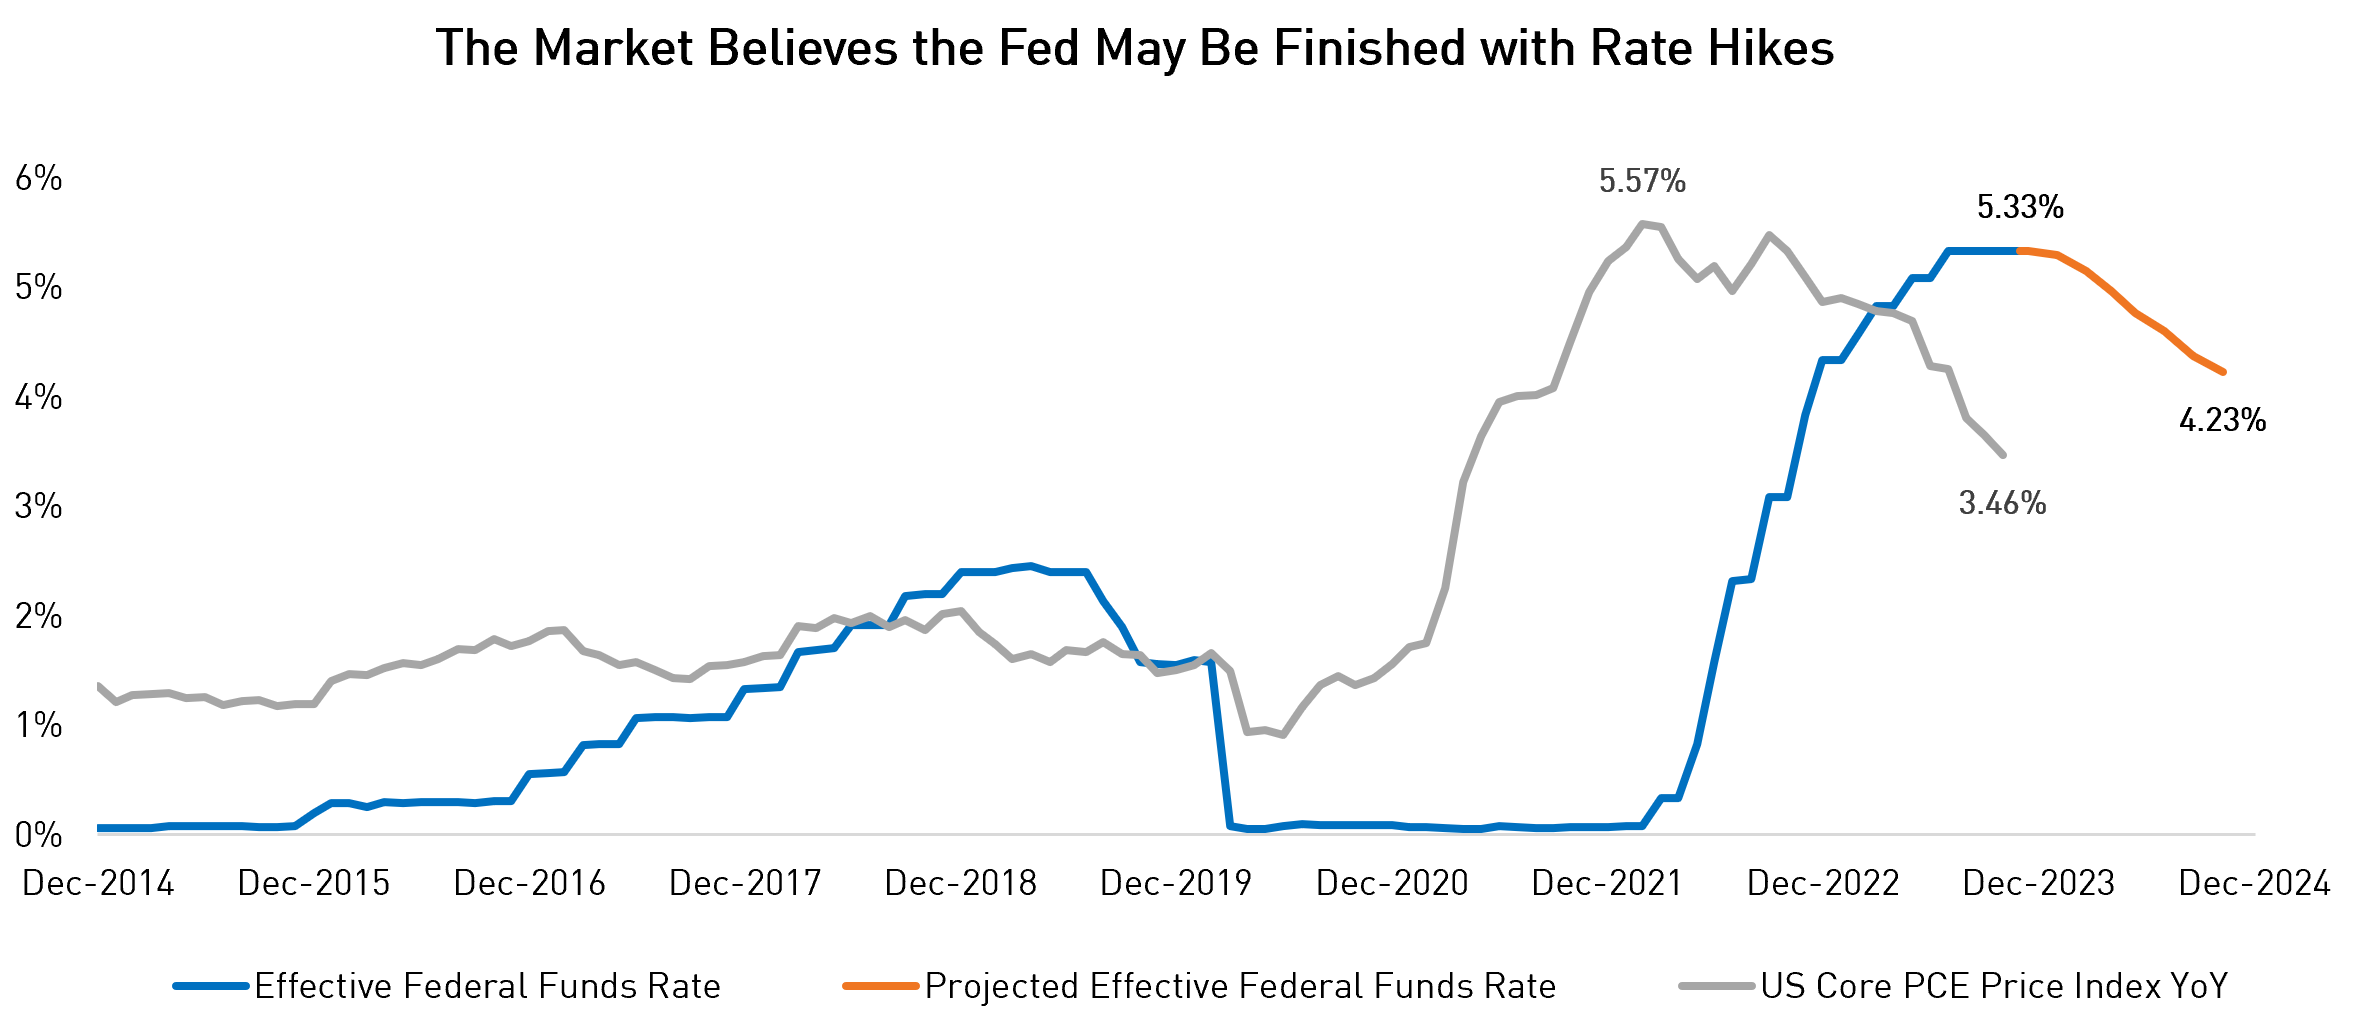 The Market Believes the Fed May Be Finished with Rate Hikes